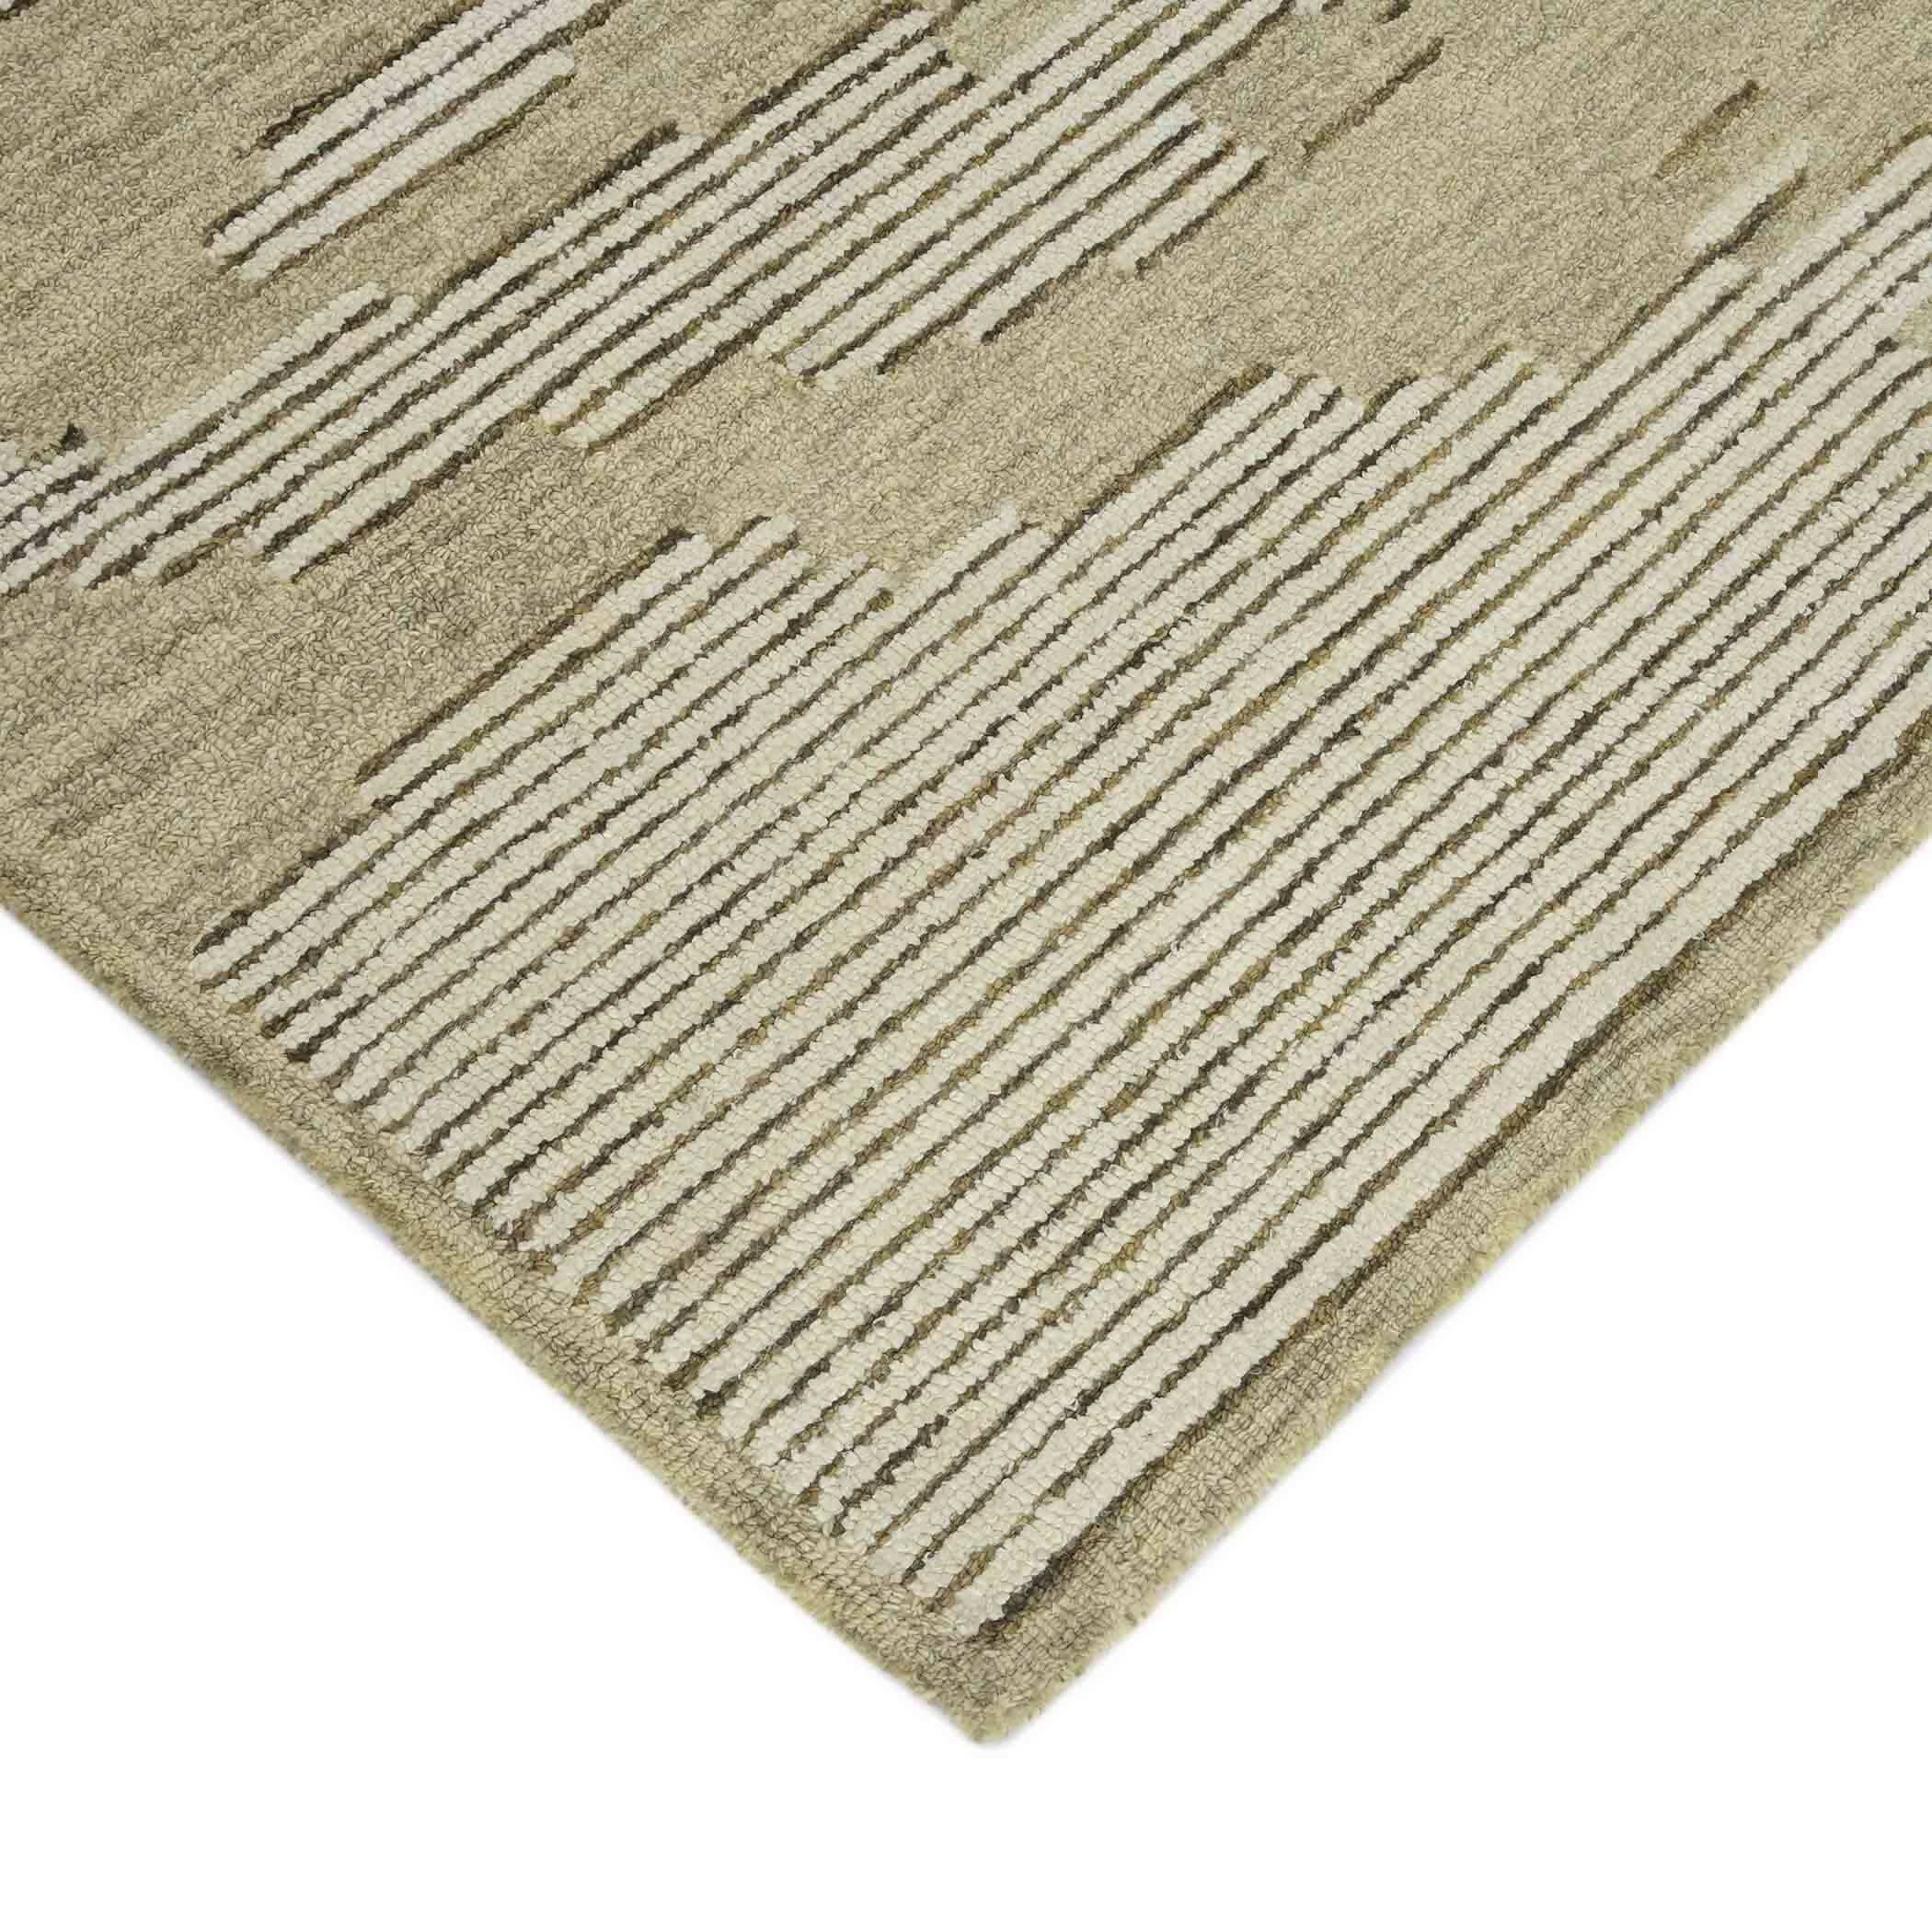 Ivory Wool Chicago 5x8 Feet Hand-Tufted Carpet Rug